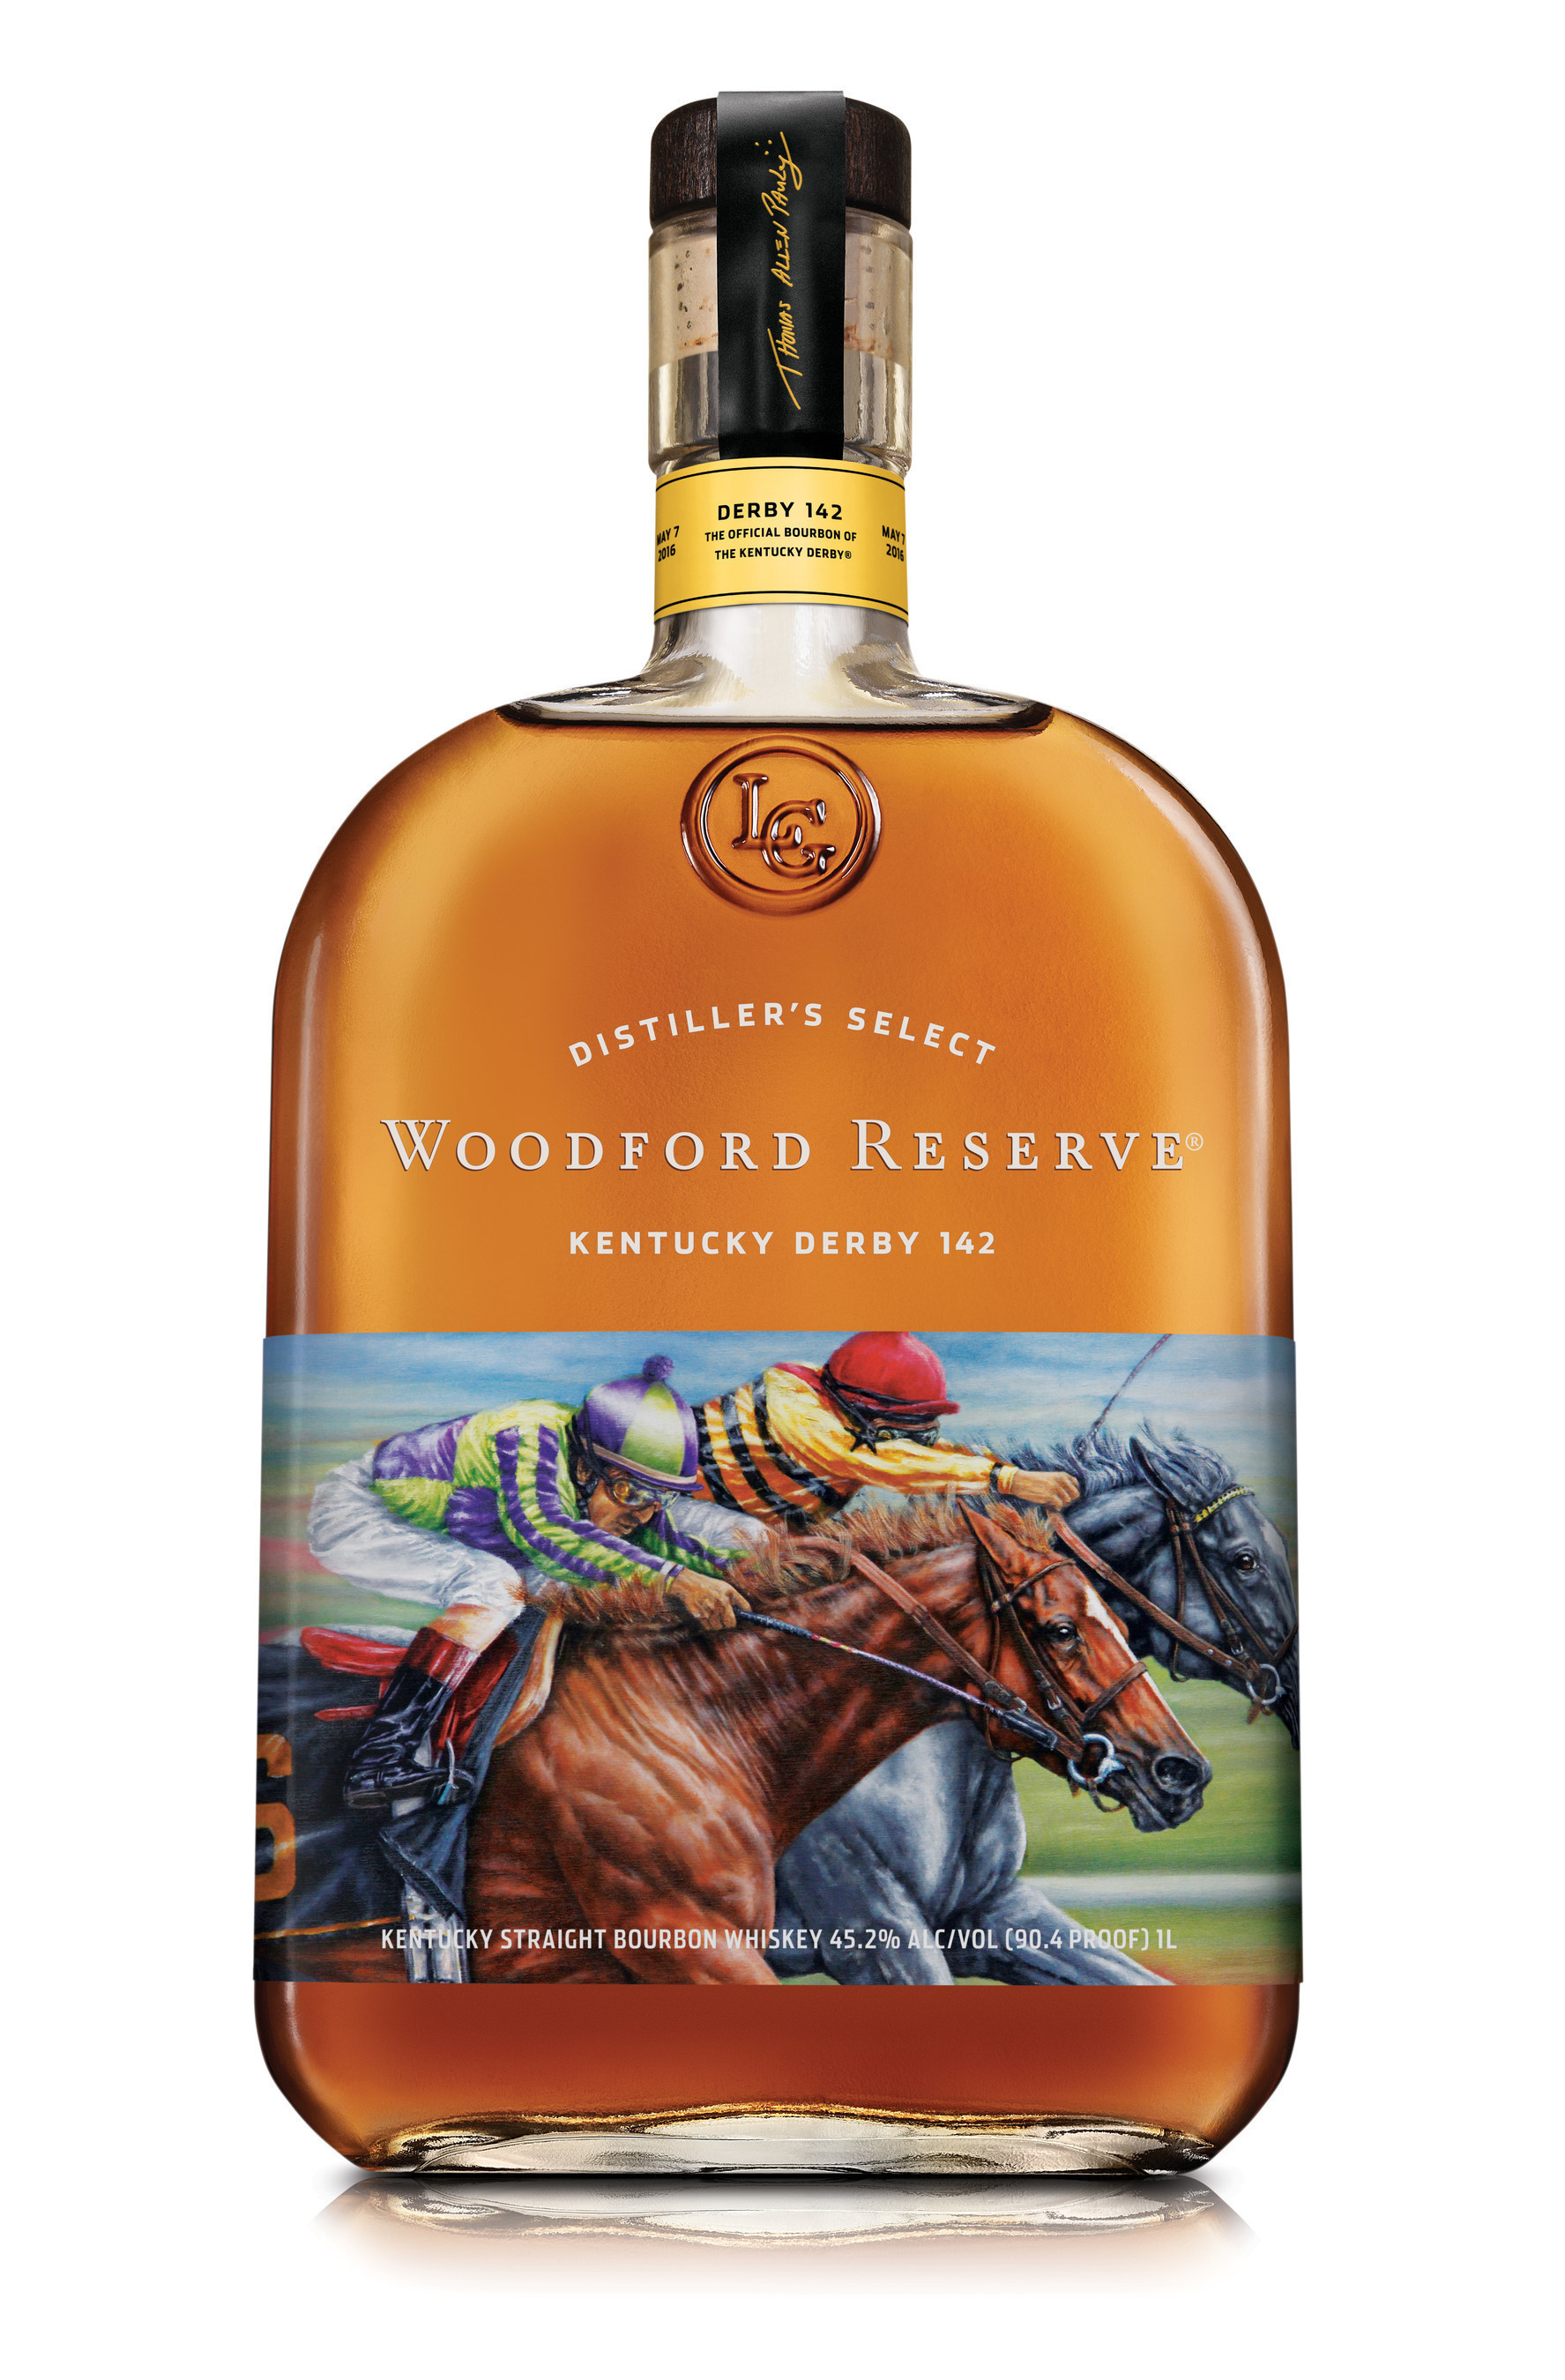 Woodford Reserve(R), the Official Bourbon of the Kentucky Derby(R), is honoring this year's "Run for the Roses"(TM) with the release of its 2016 Kentucky Derby commemorative bottle.  This year's limited-edition Woodford Reserve Kentucky Derby bottle features artwork from award-winning equine artist Thomas Allen Pauly.